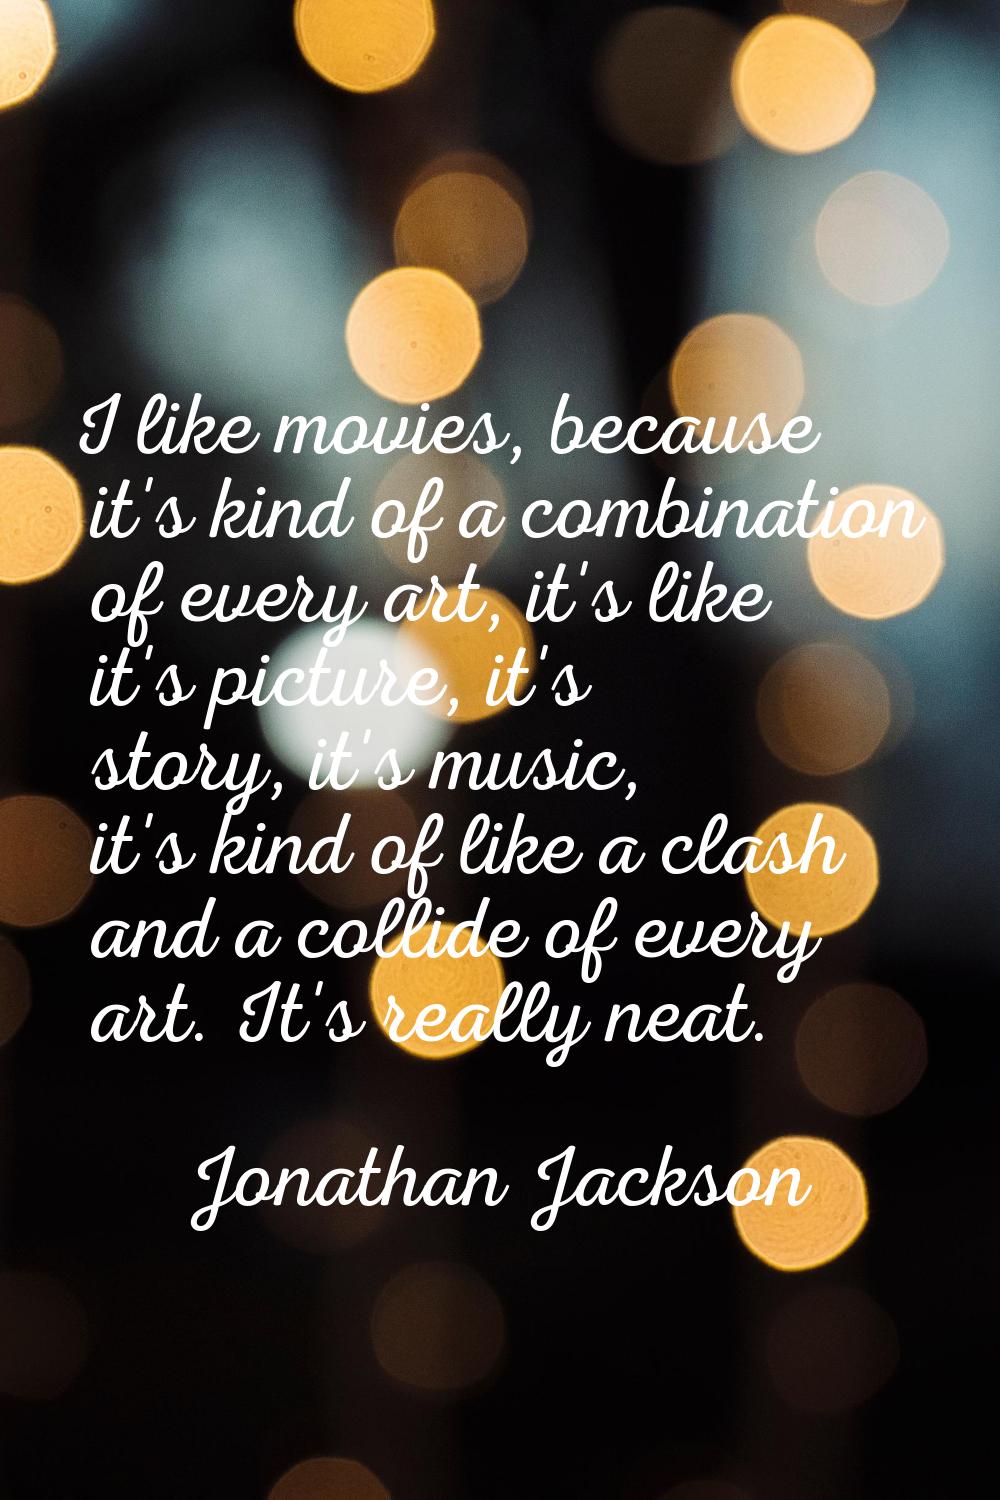 I like movies, because it's kind of a combination of every art, it's like it's picture, it's story,